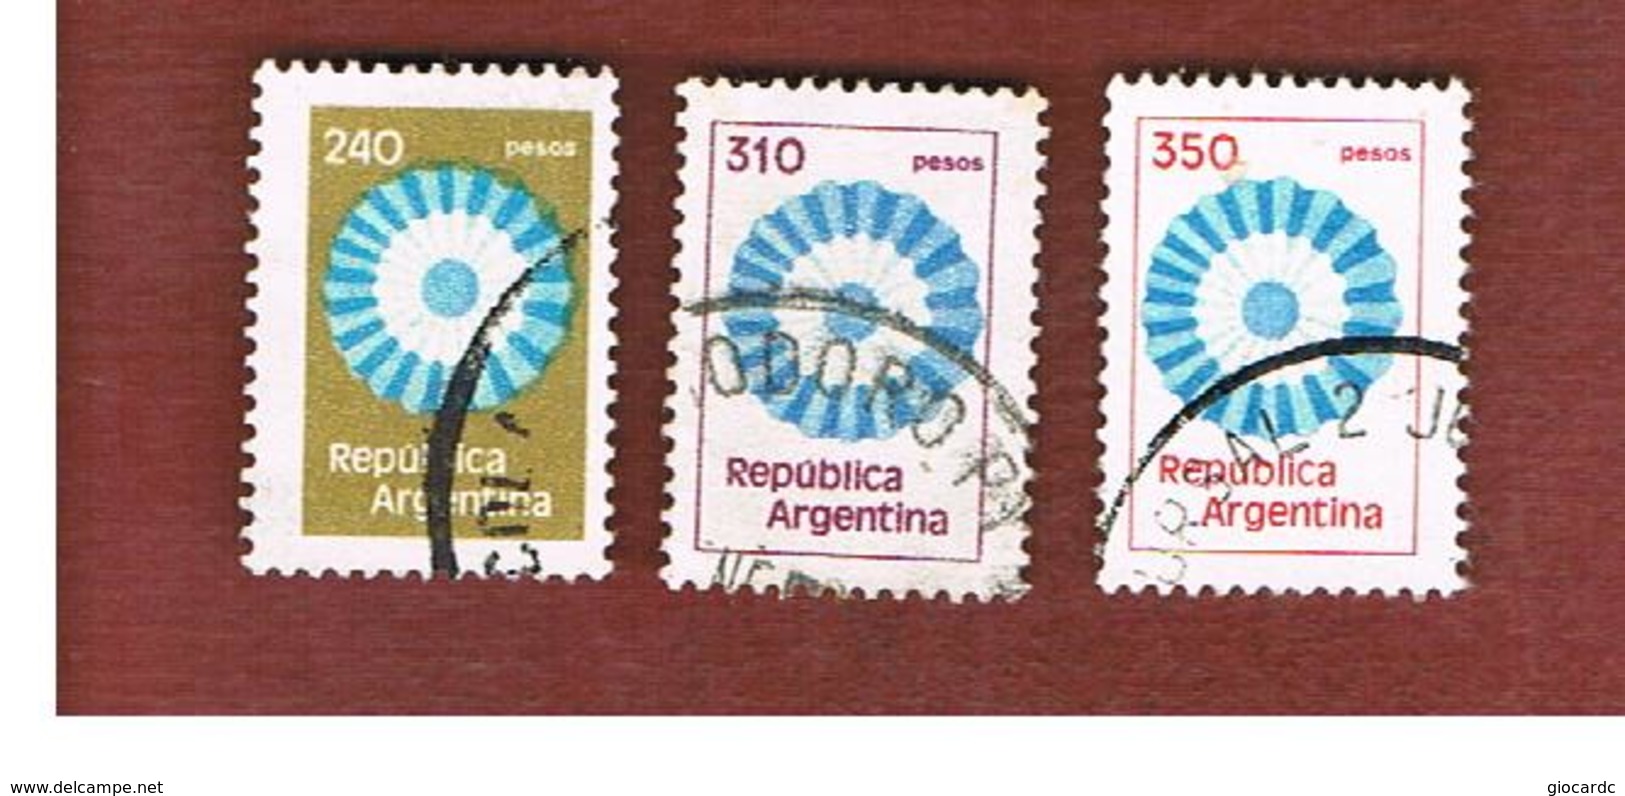 ARGENTINA - SG 1624.1632c  - 1979 ROSETTE (3 STAMPS OF THE CURRENT SERIE)    -   USED ° - Usados